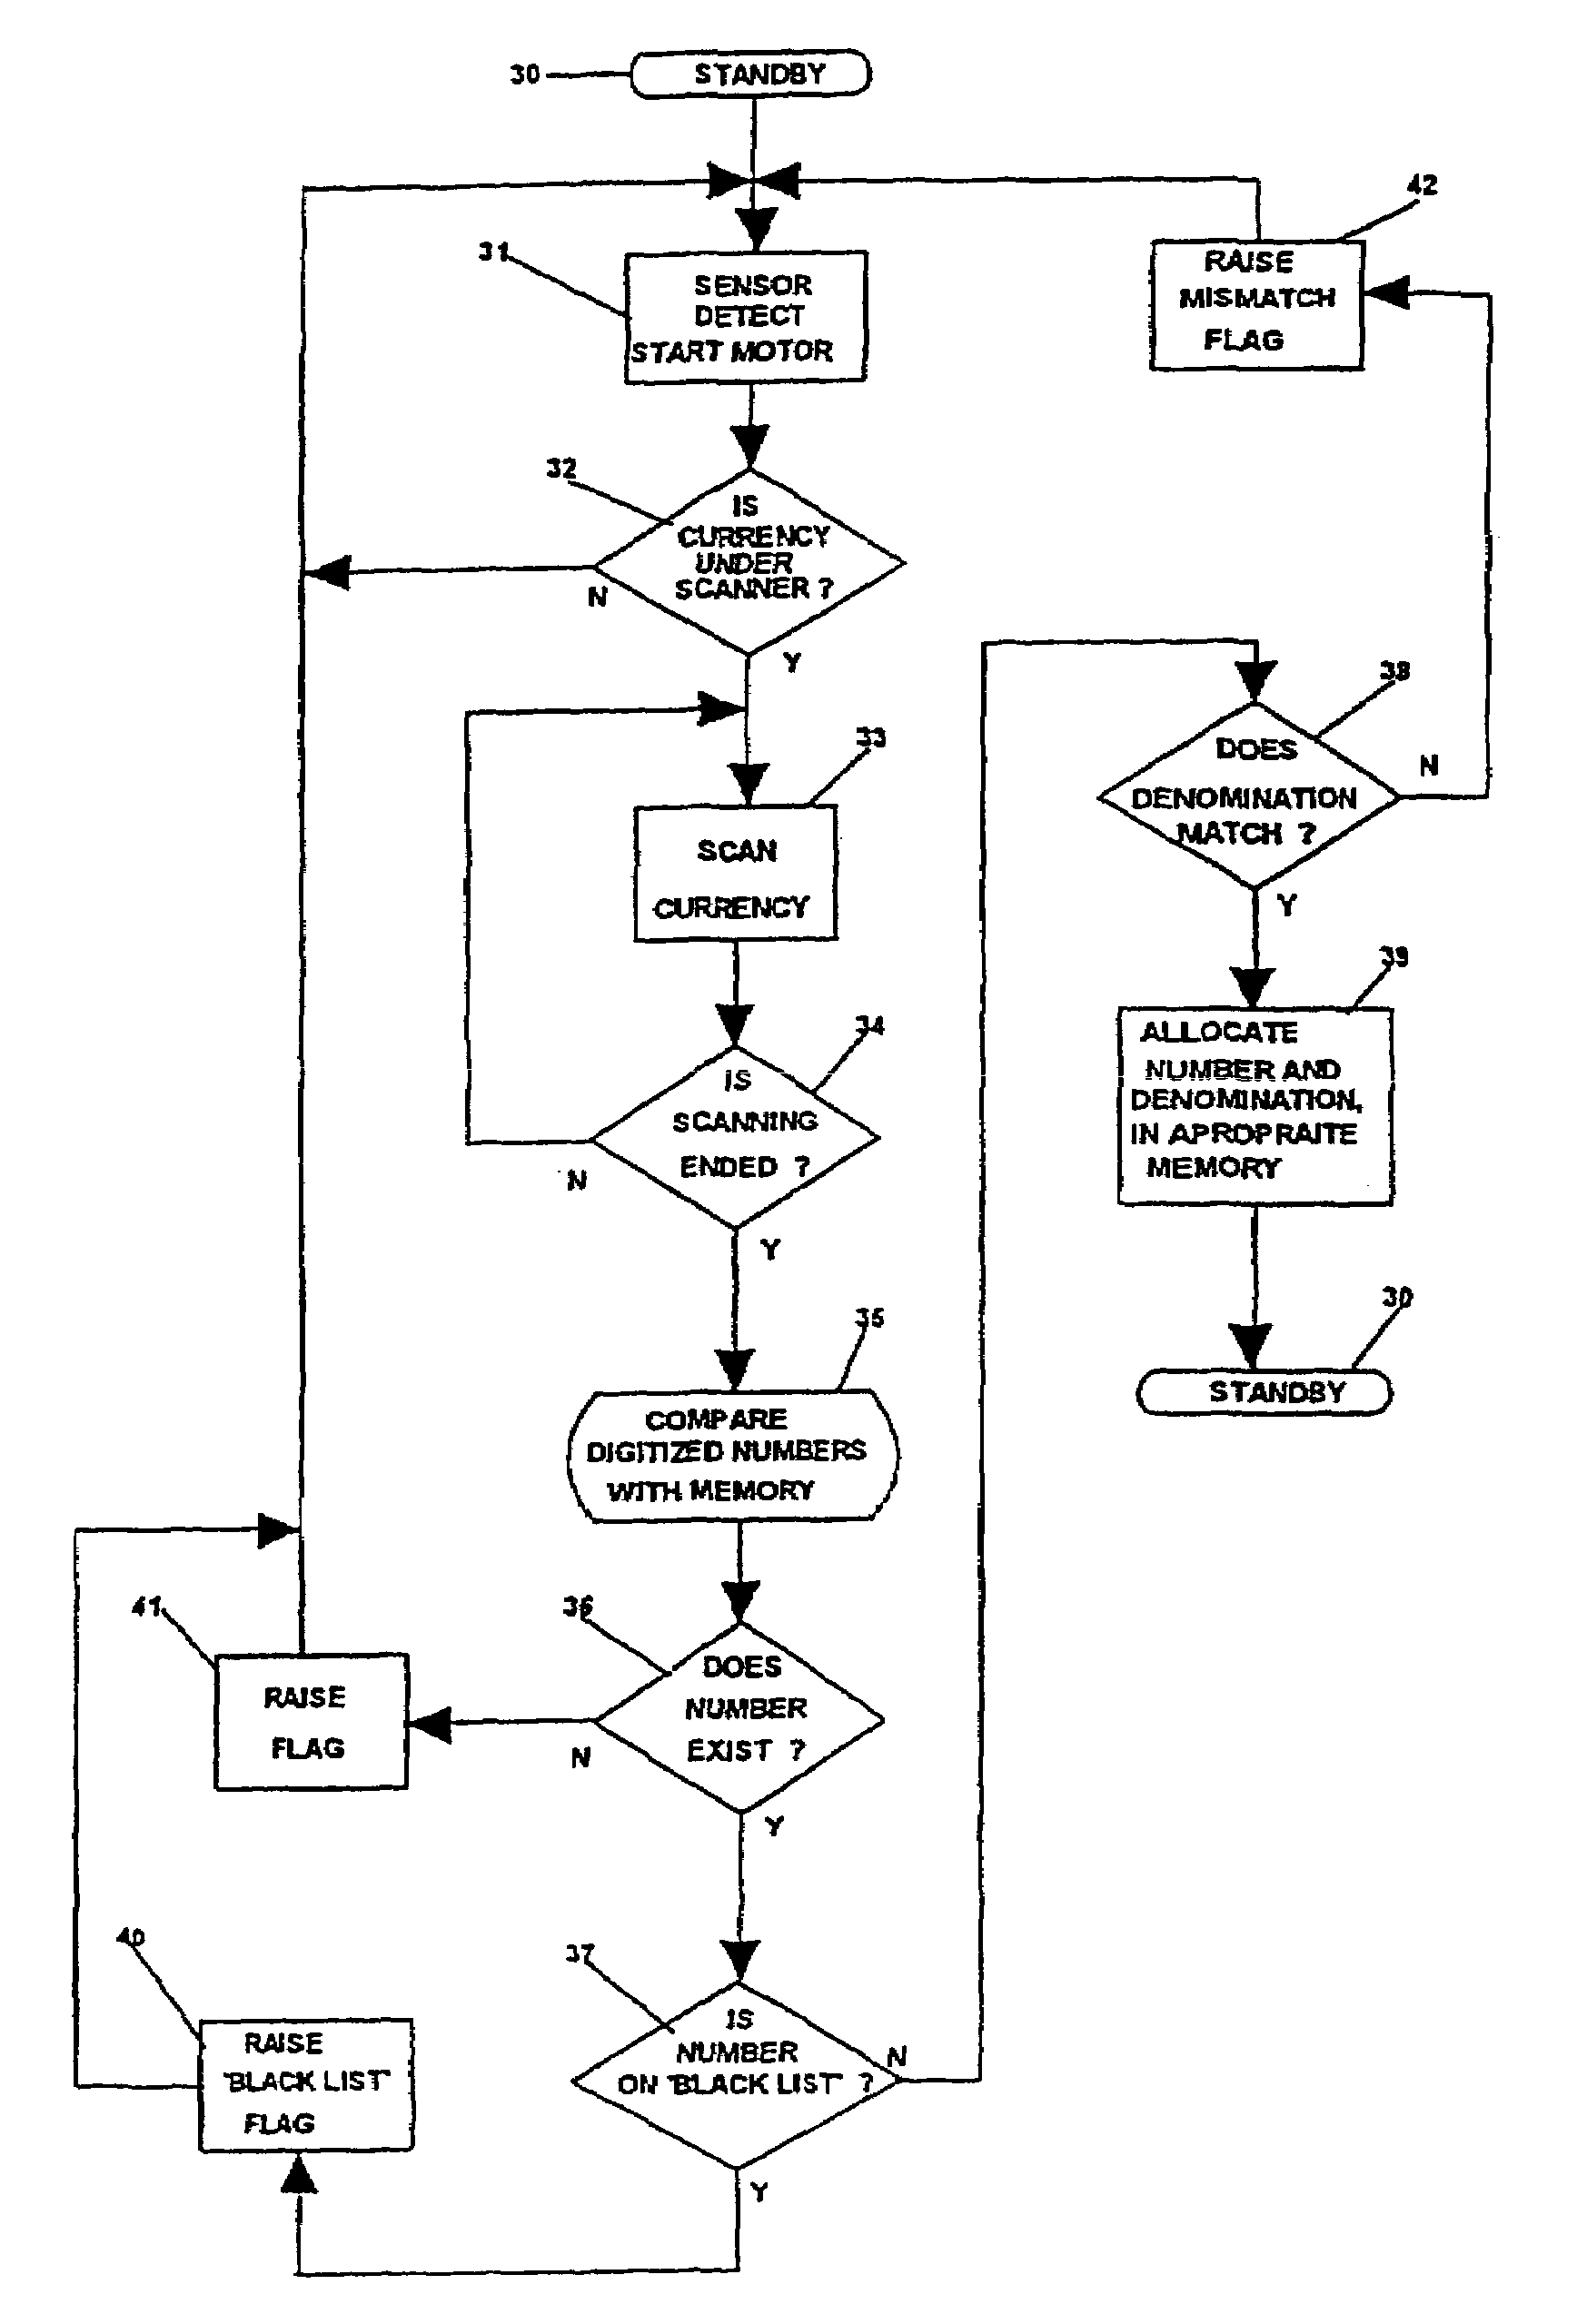 System and method for intelligent currency validation